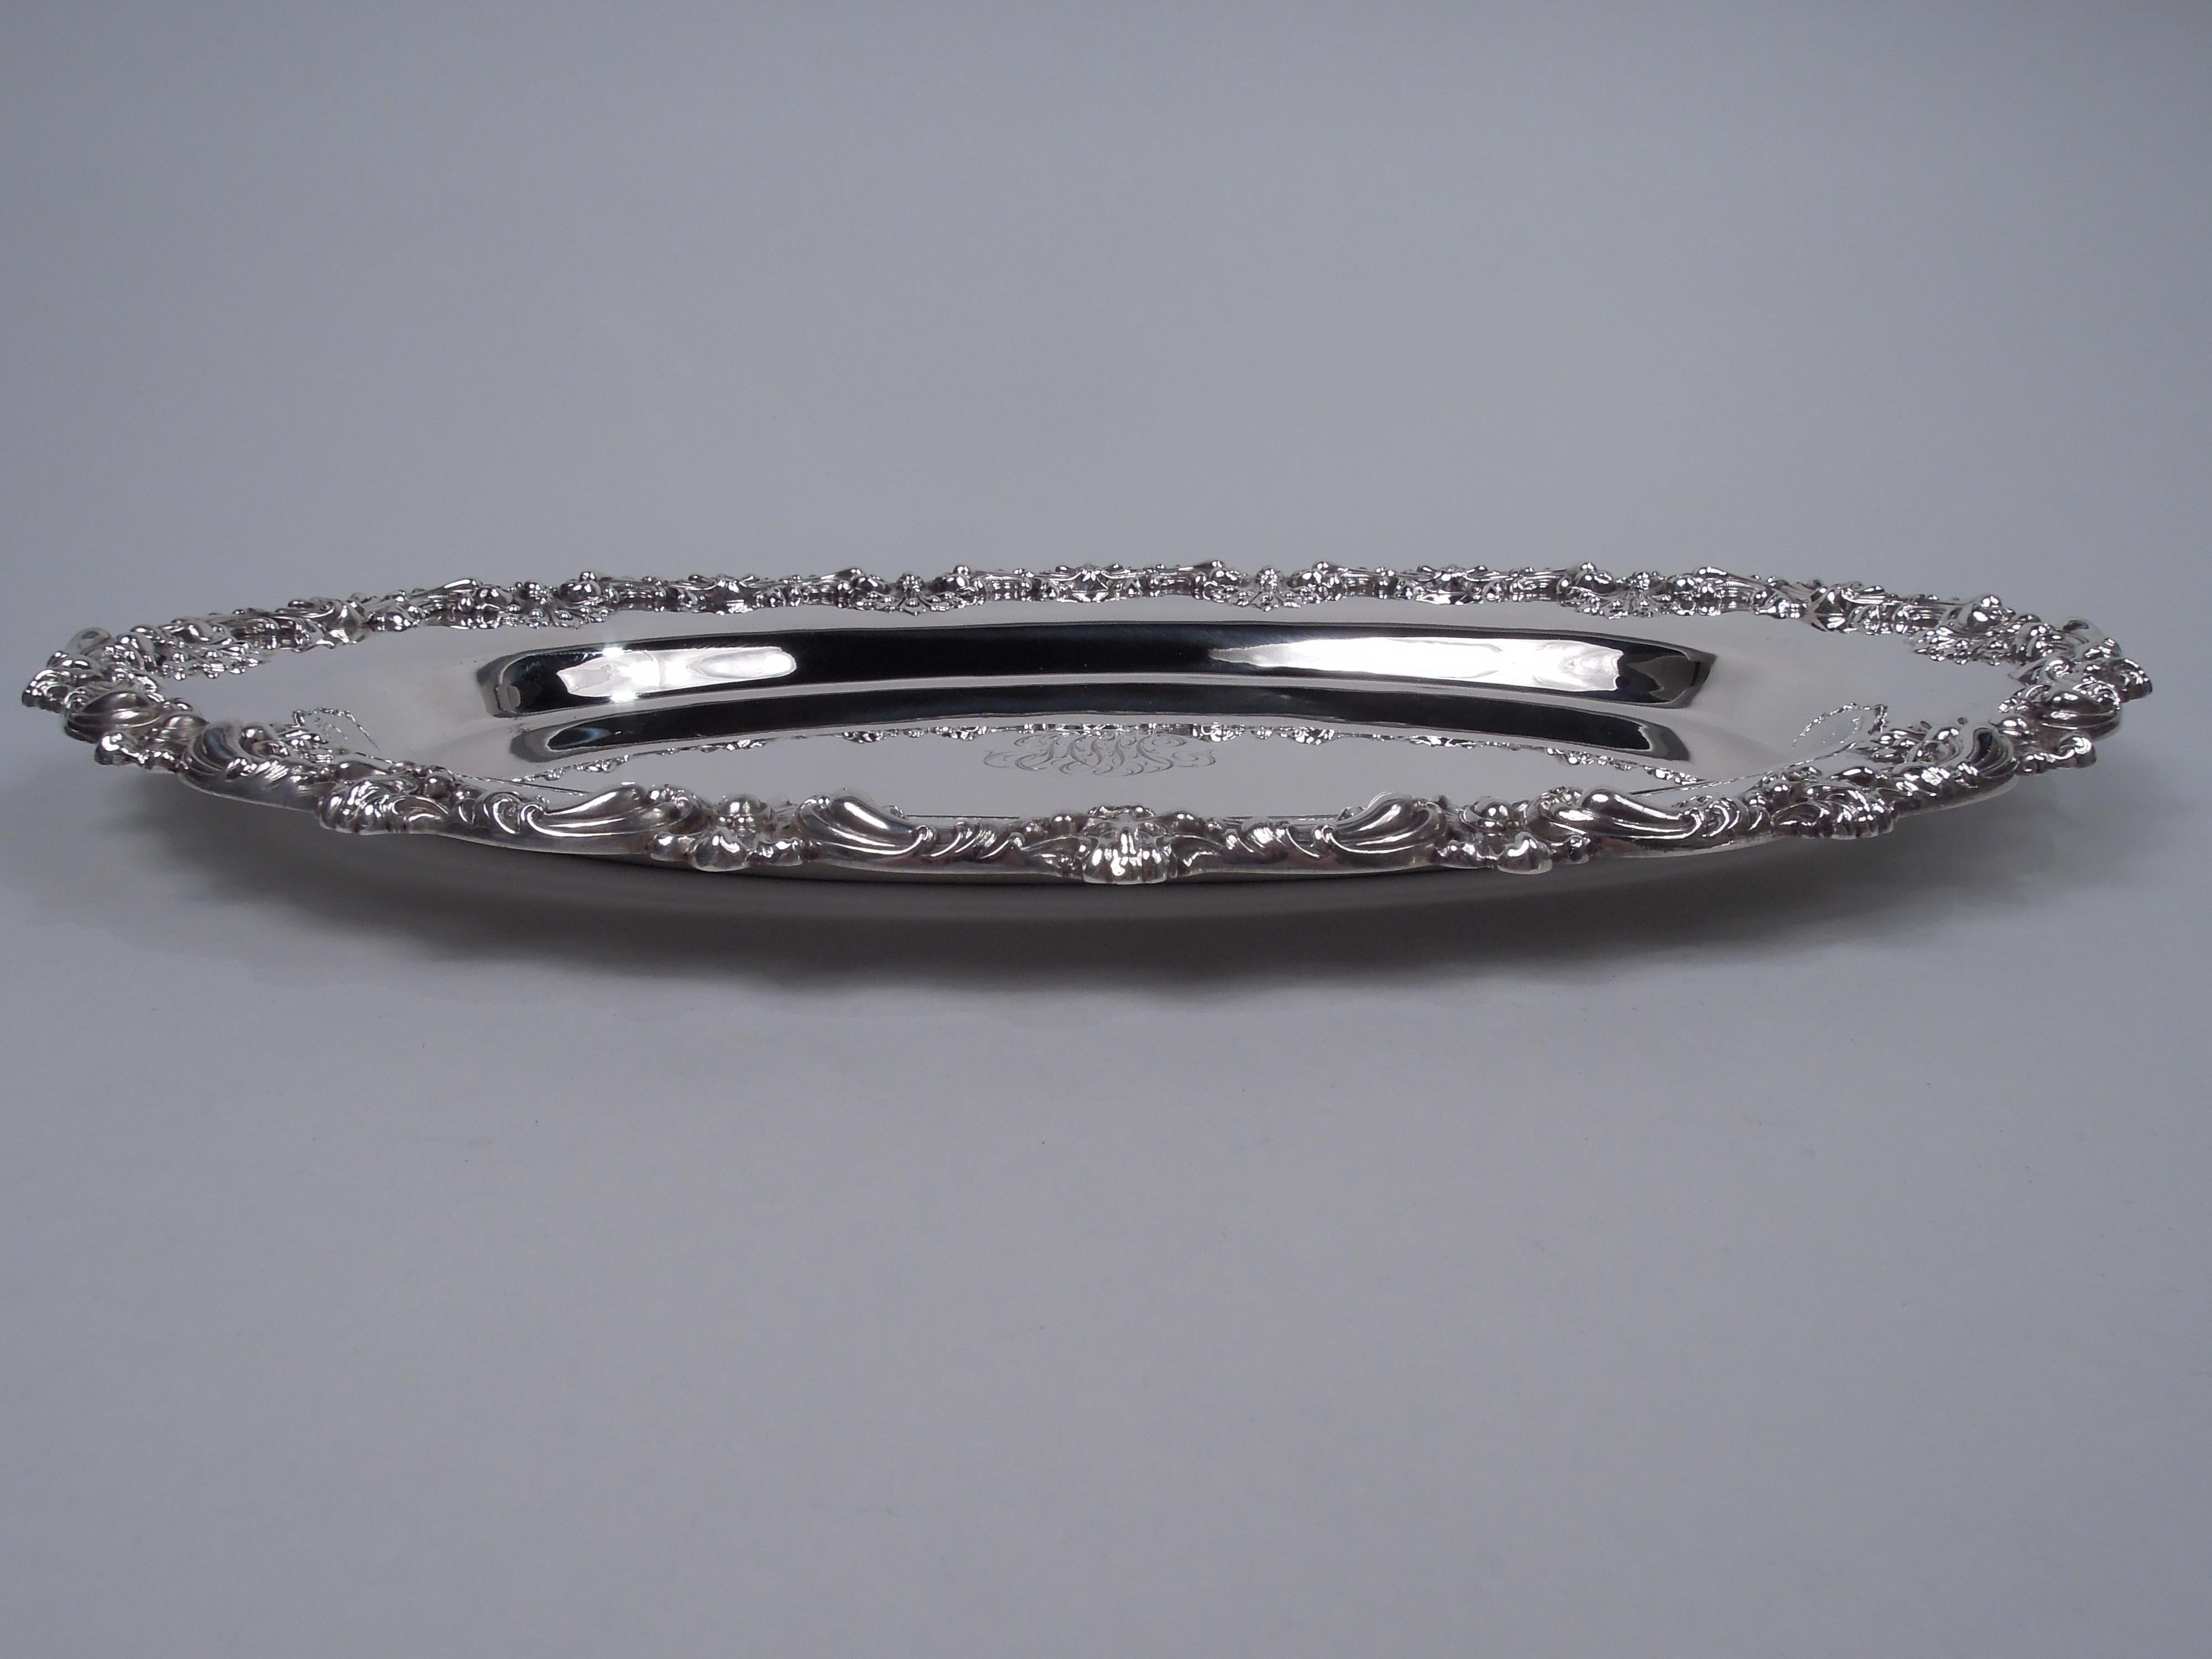 American Edwardian Classical sterling silver tray, ca 1910. Oval well engraved with wide shoulder; applied scroll and shell rim. Engraved interlaced script monogram. A capacious platter for holiday feasts. Marks include no. 4279A. No maker’s stamp